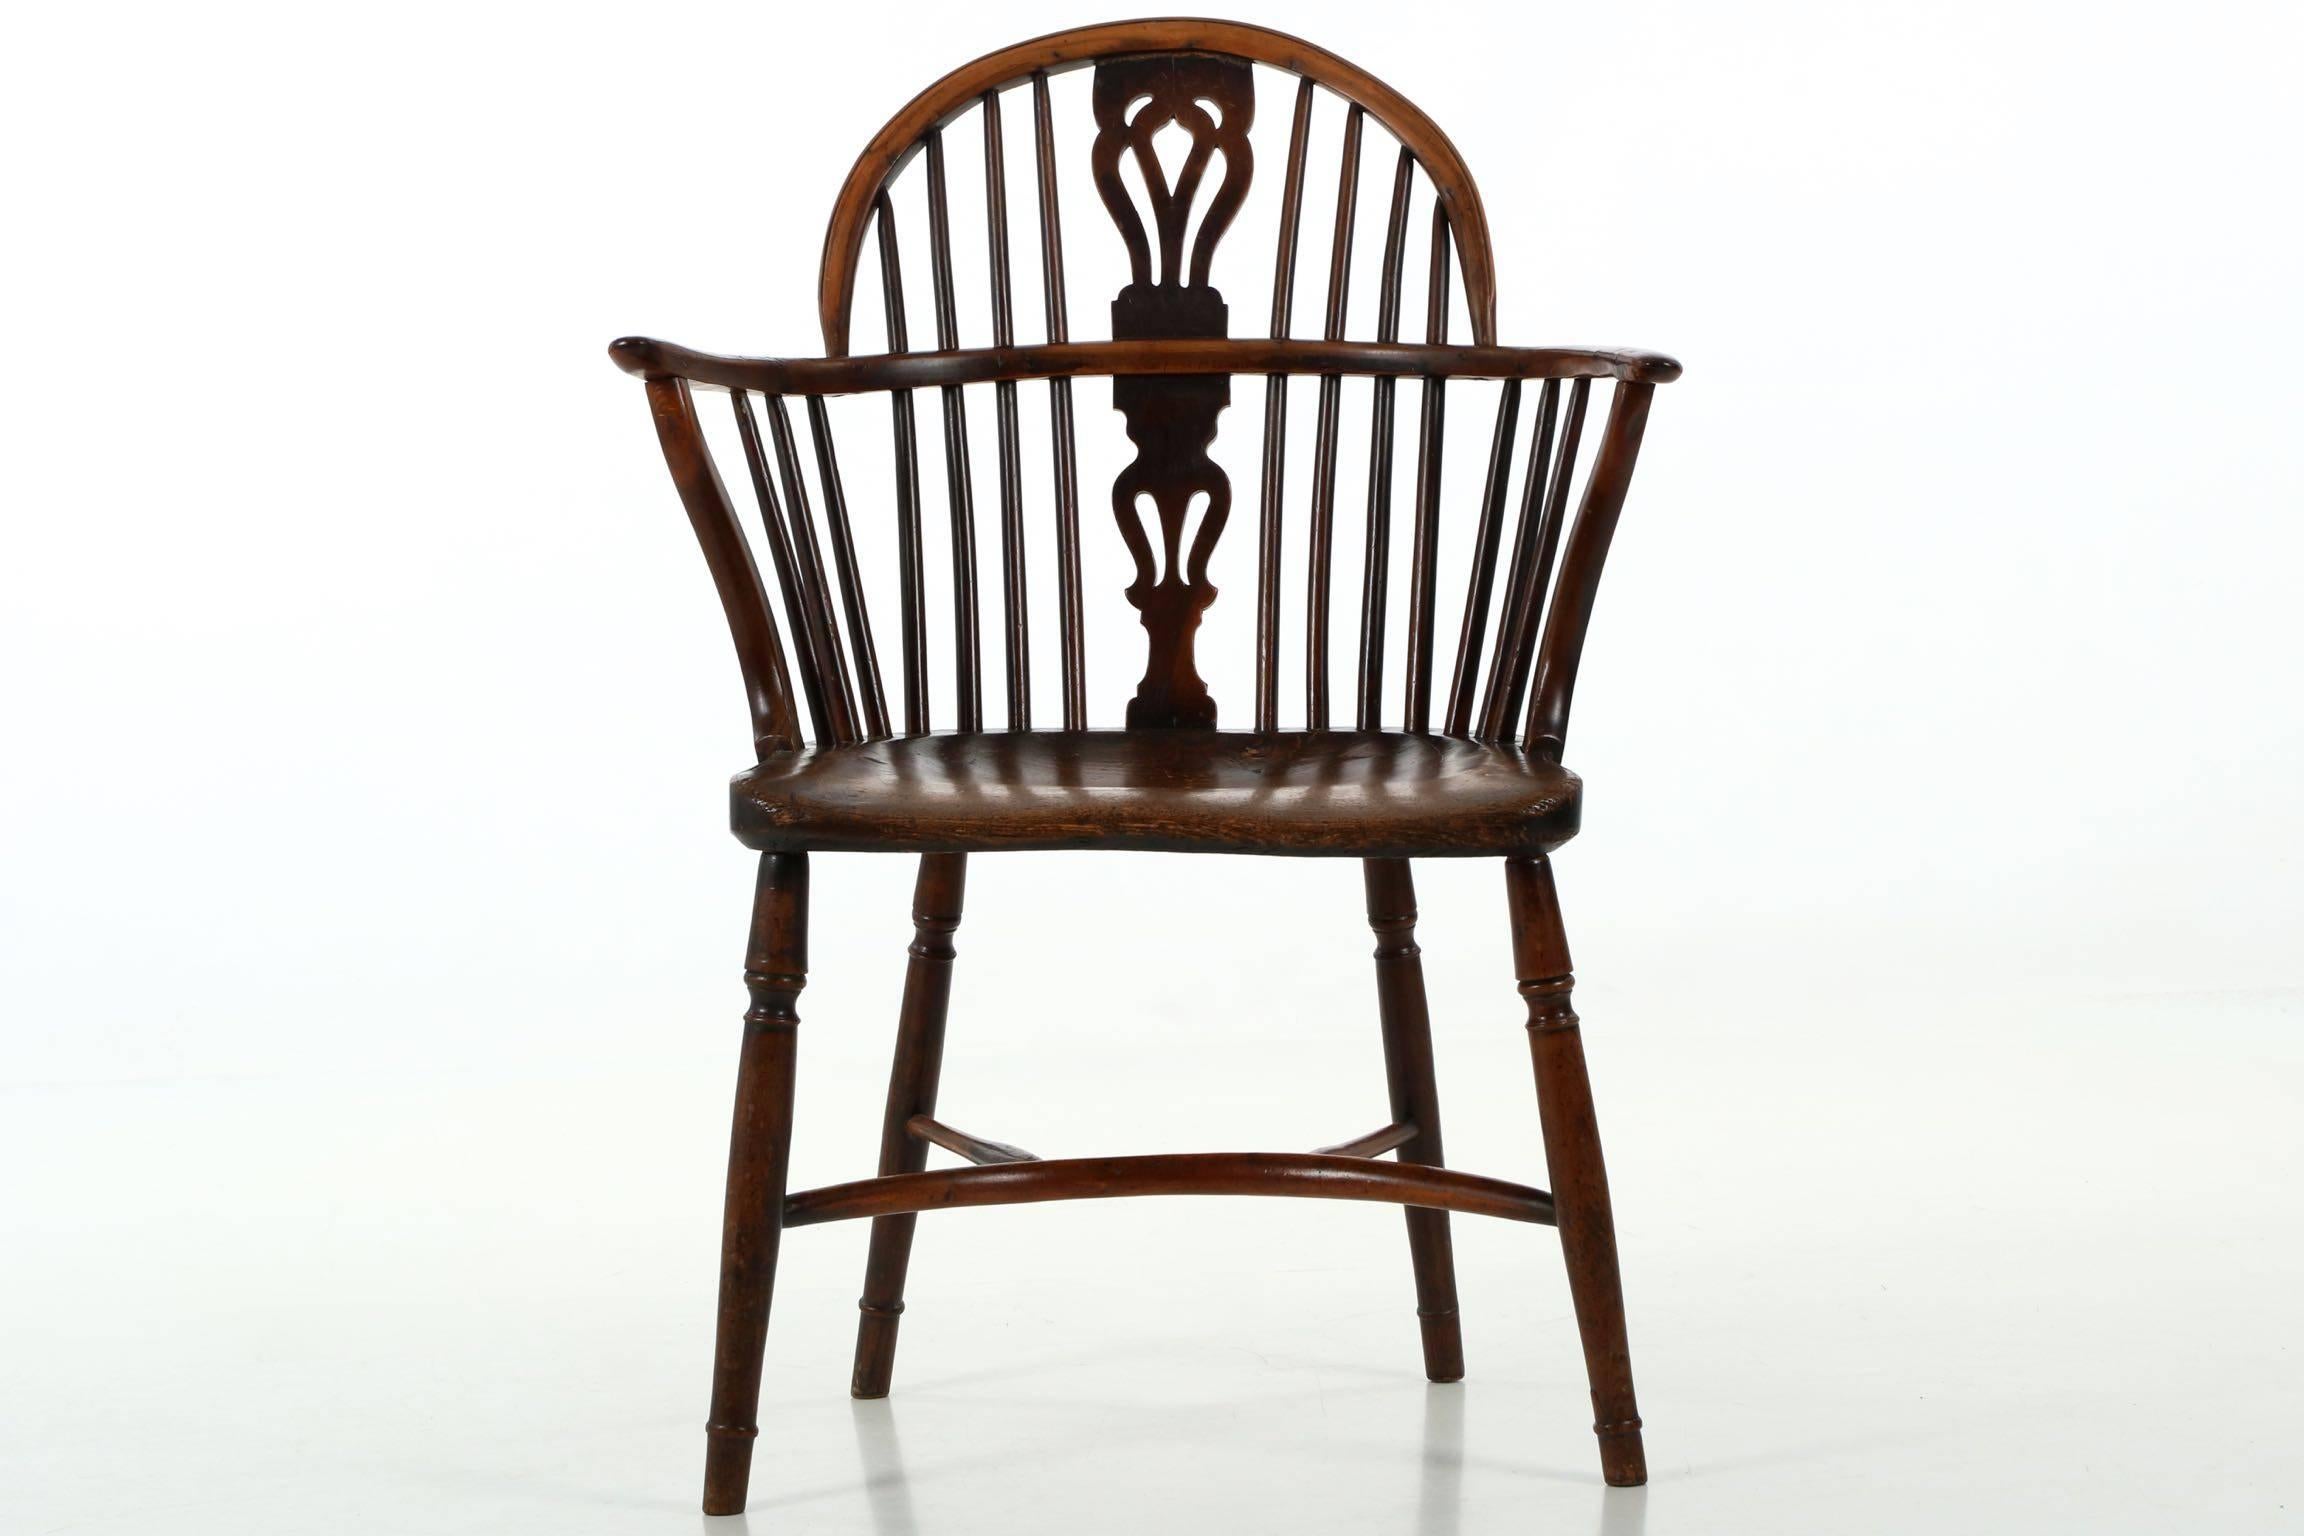 This very fine early 19th century Windsor armchair, a form generally produced during 1810-1840 with a pierced splat design closely related to signed chairs in Worksop and Nottingham in England. In our experience, yew wood worn over time produces one